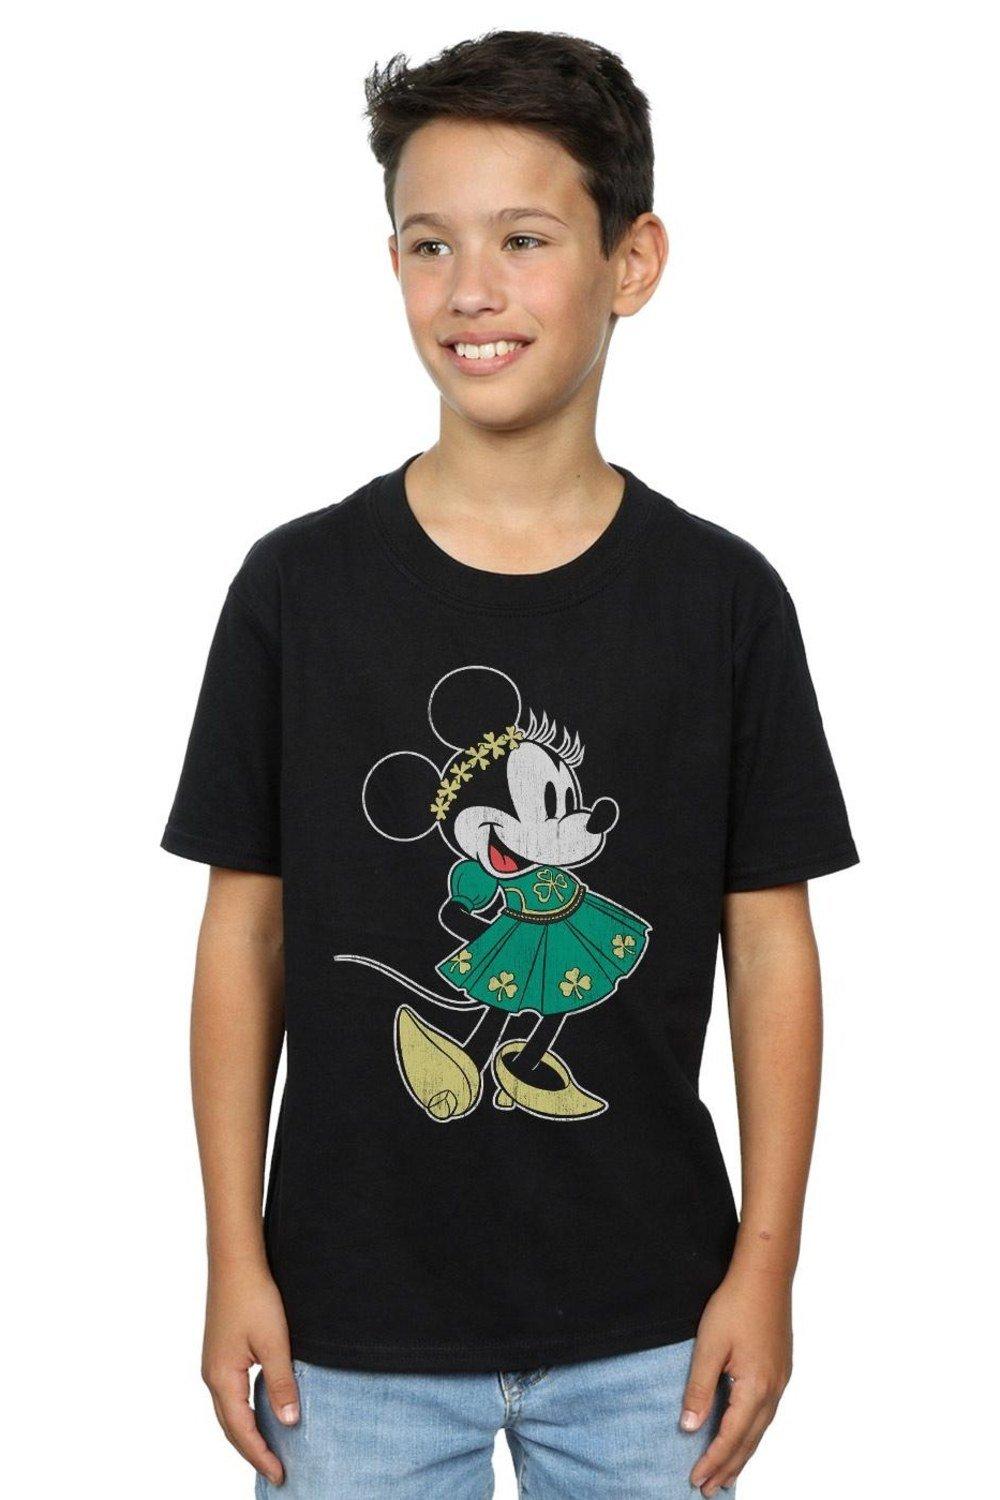 Minnie Mouse St Patrick’s Day Costume T-Shirt